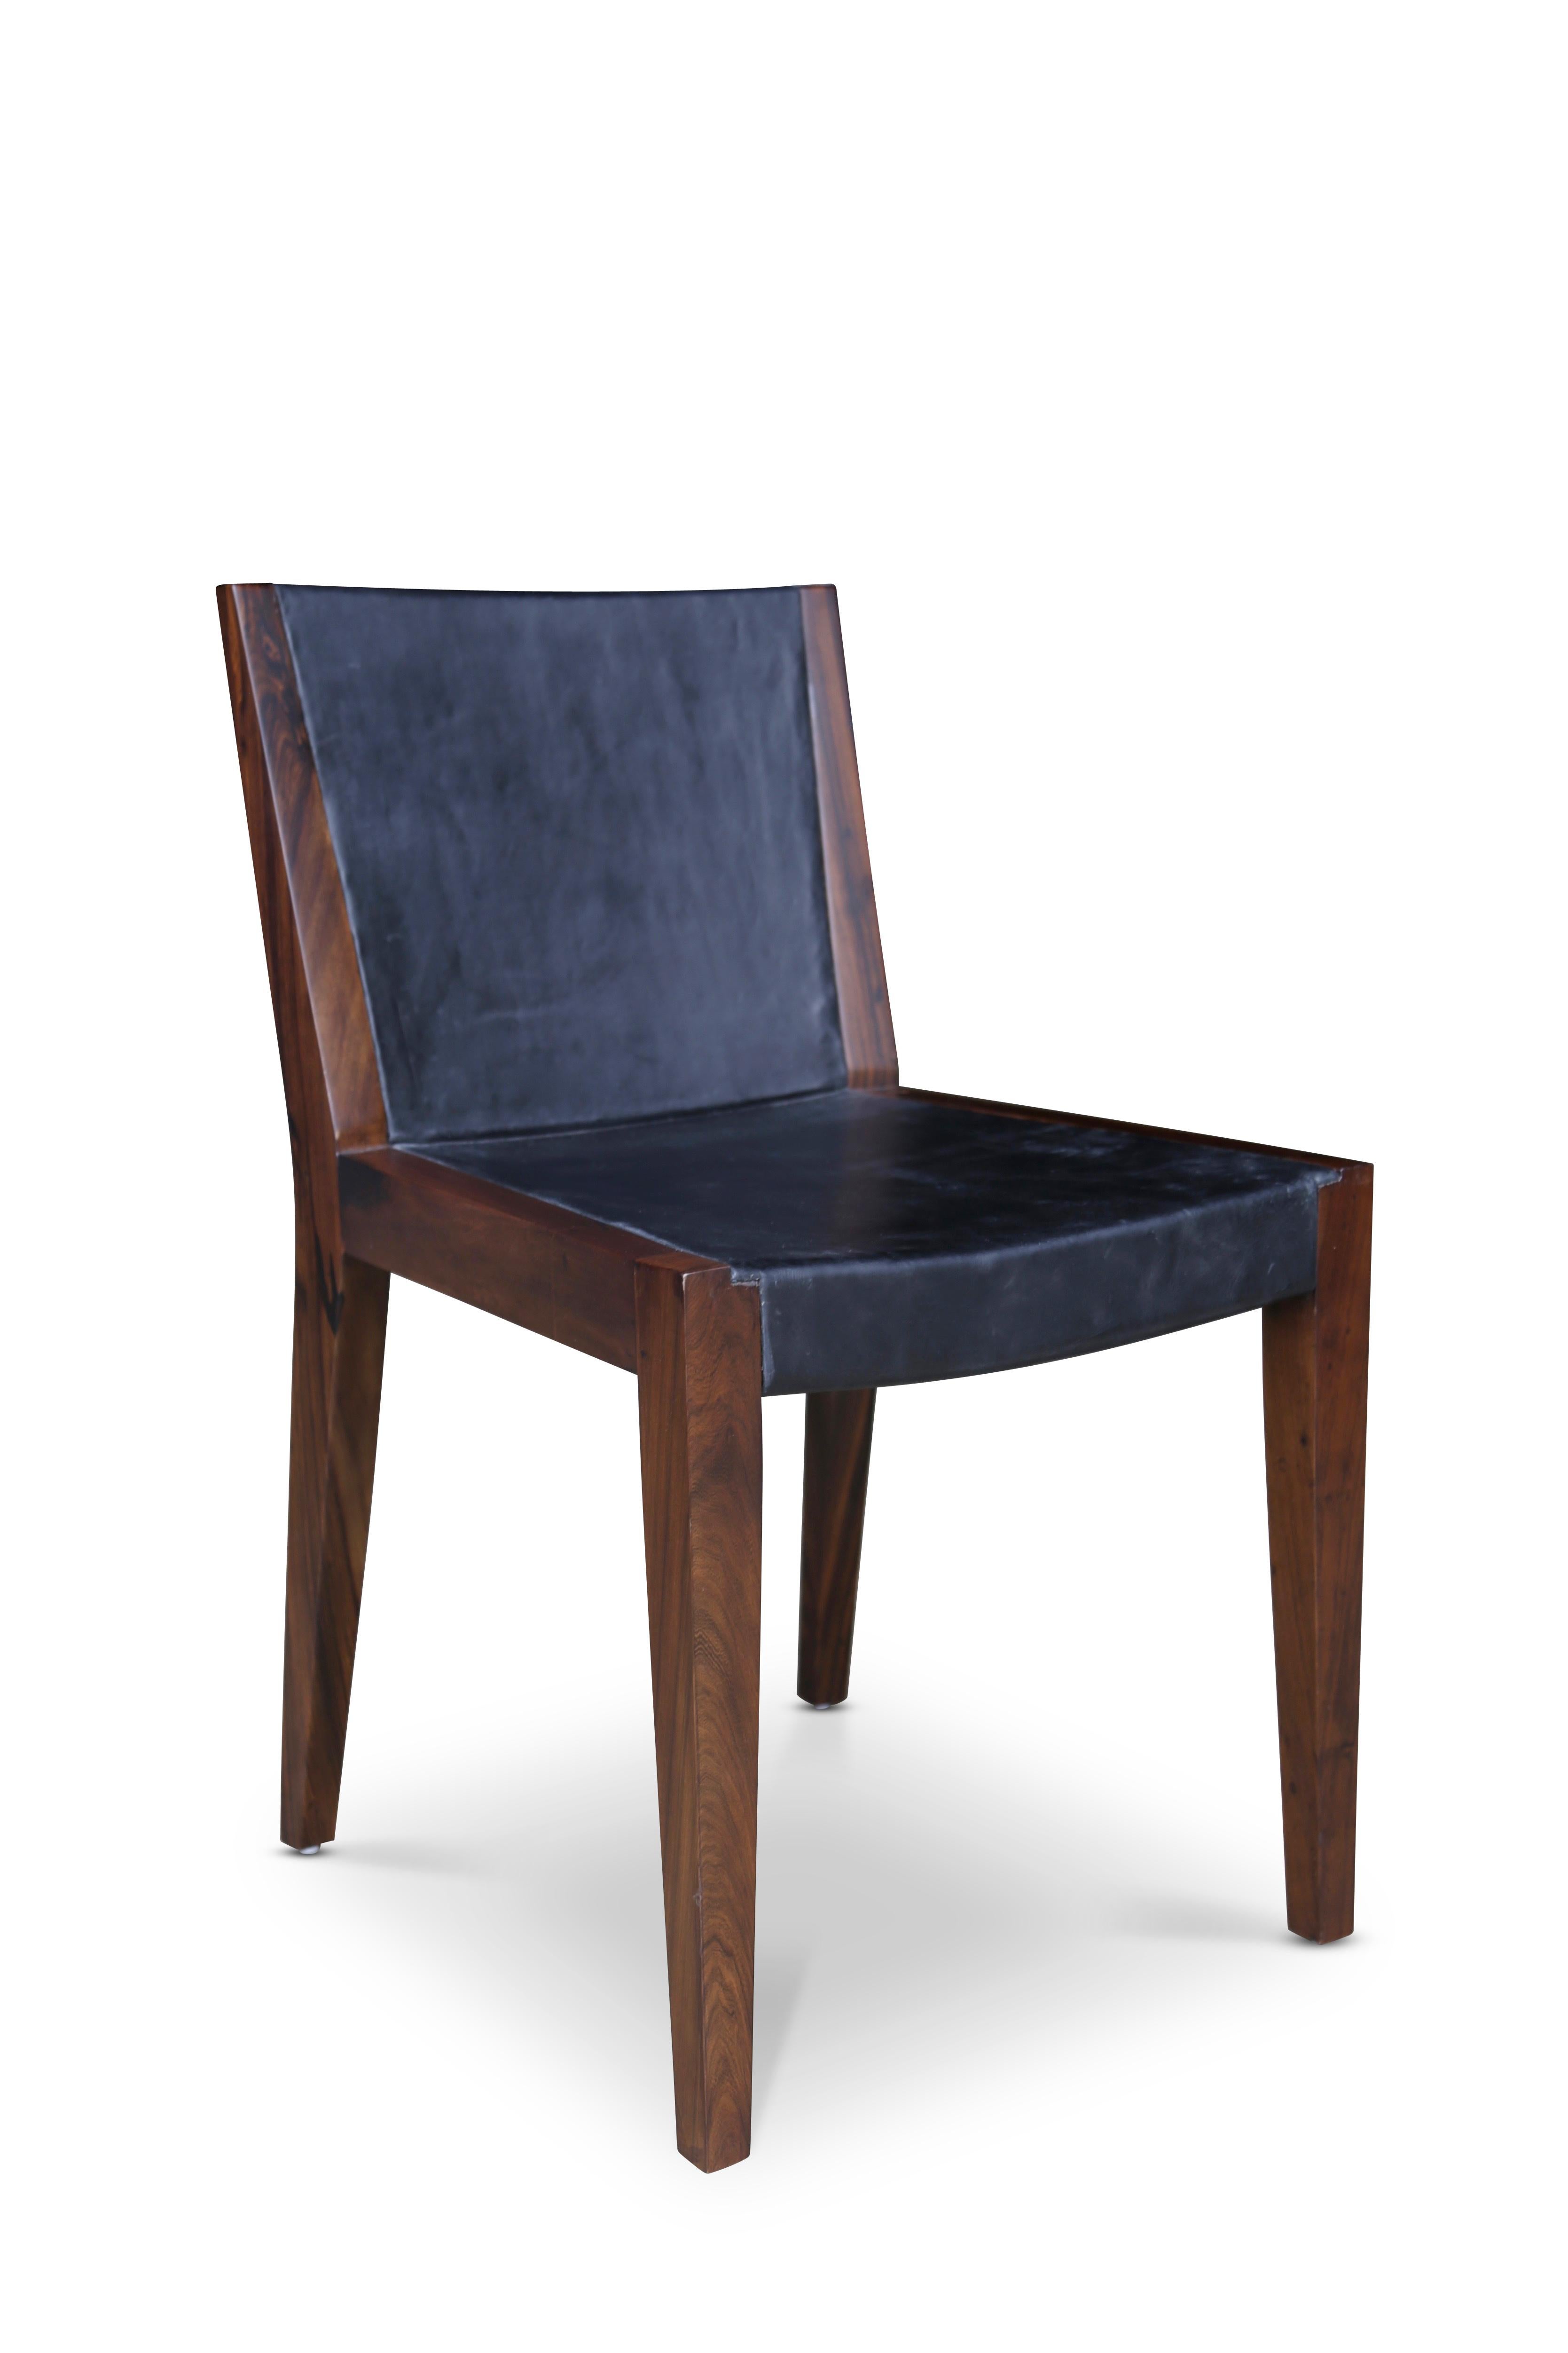 Solid Argentine Rosewood and Leather Dining Chair from Costantini, Giovanni  In New Condition For Sale In New York, NY